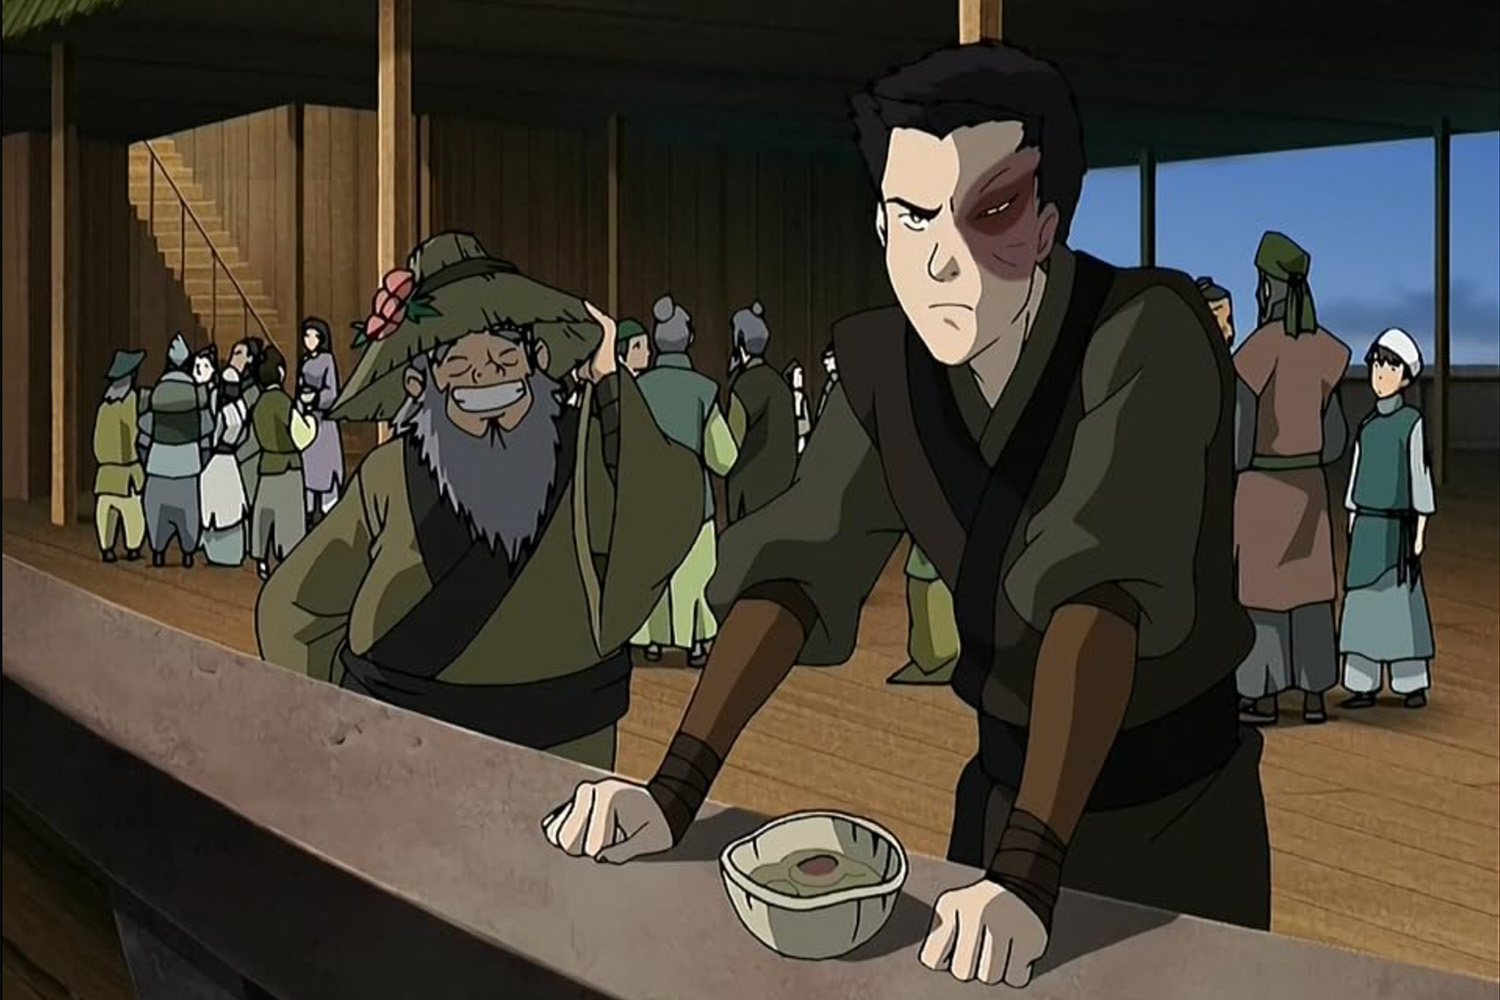 A still from "Avatar: The Last Airbender," showing Zuko upset with his uncle Iroh, who's joking around.